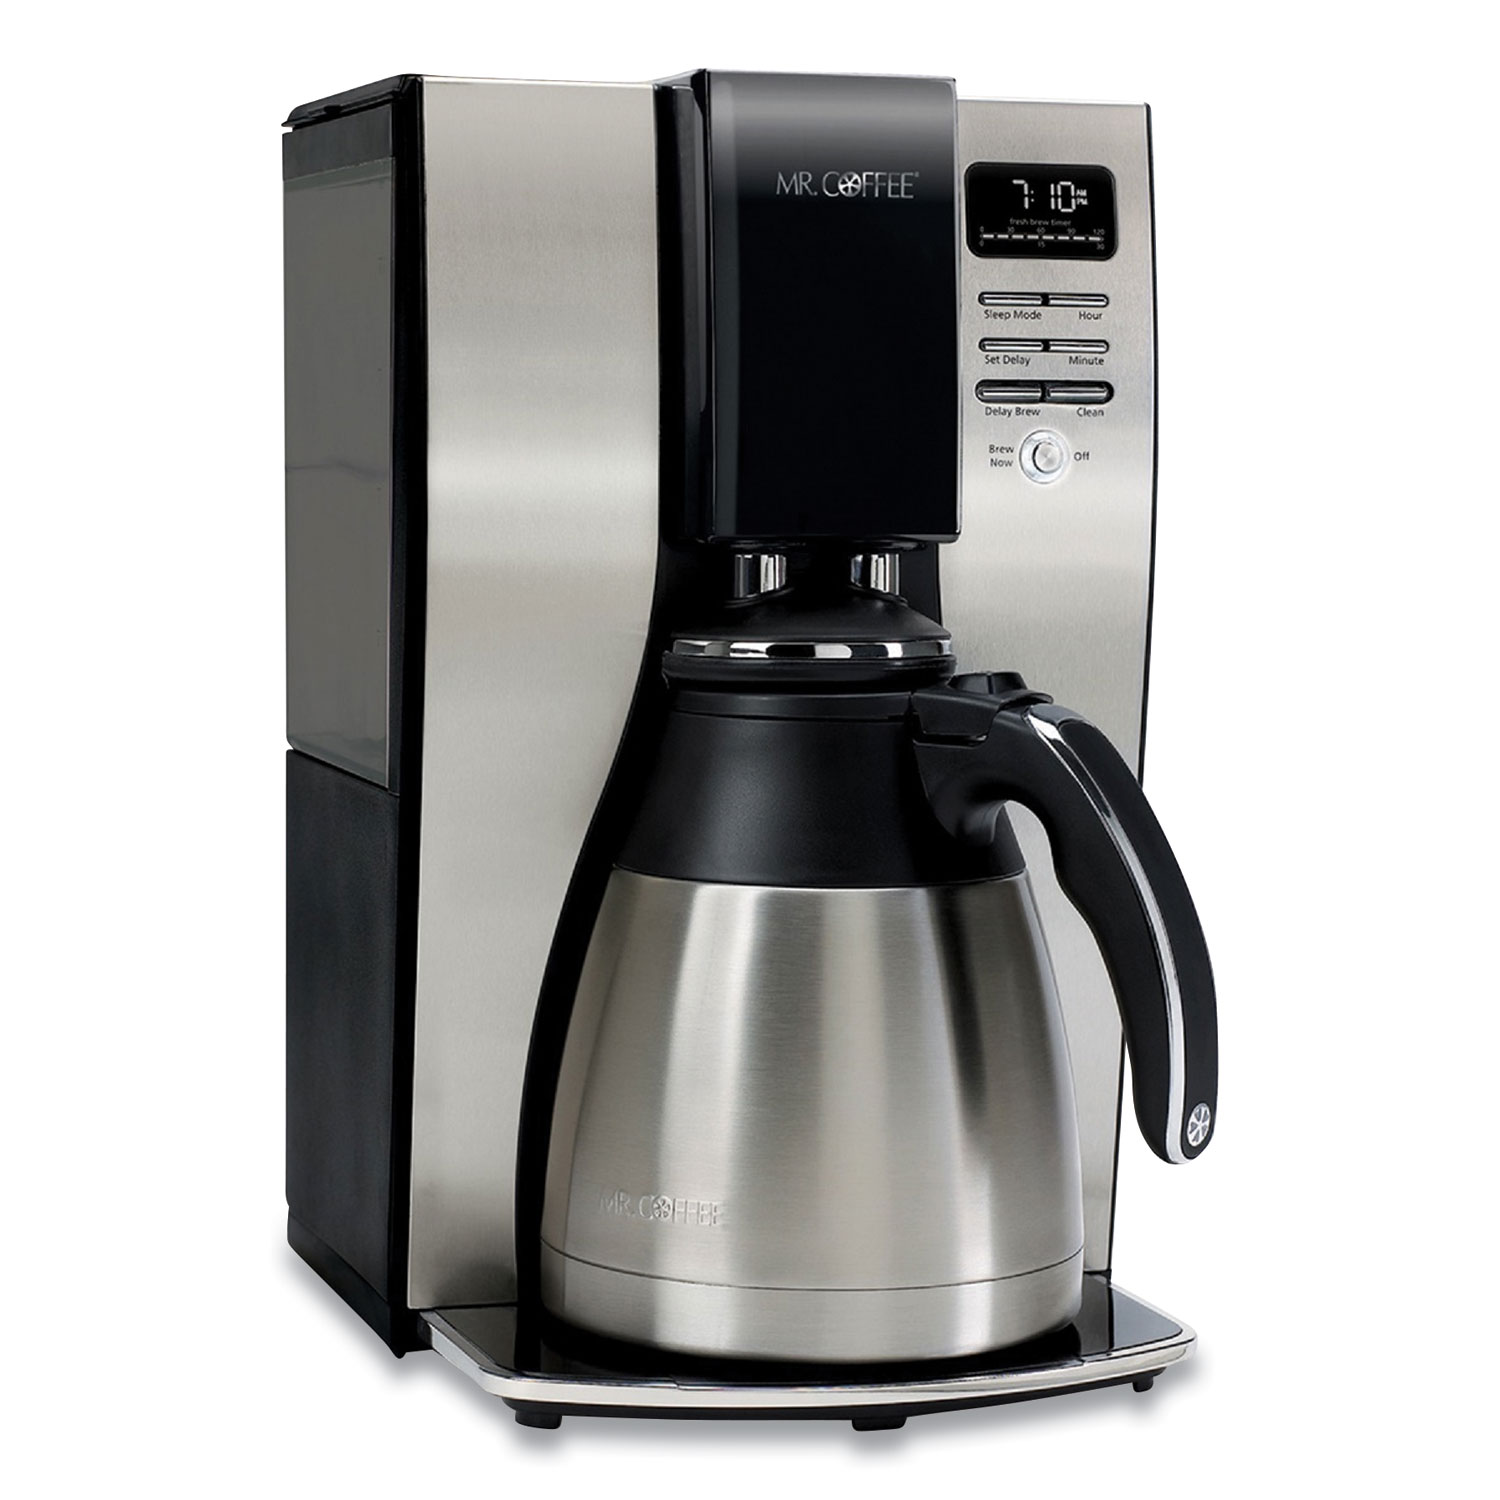  Mr. Coffee 2131962 10-Cup Thermal Programmable Coffeemaker, Stainless Steel/Black (MFE2131962) 